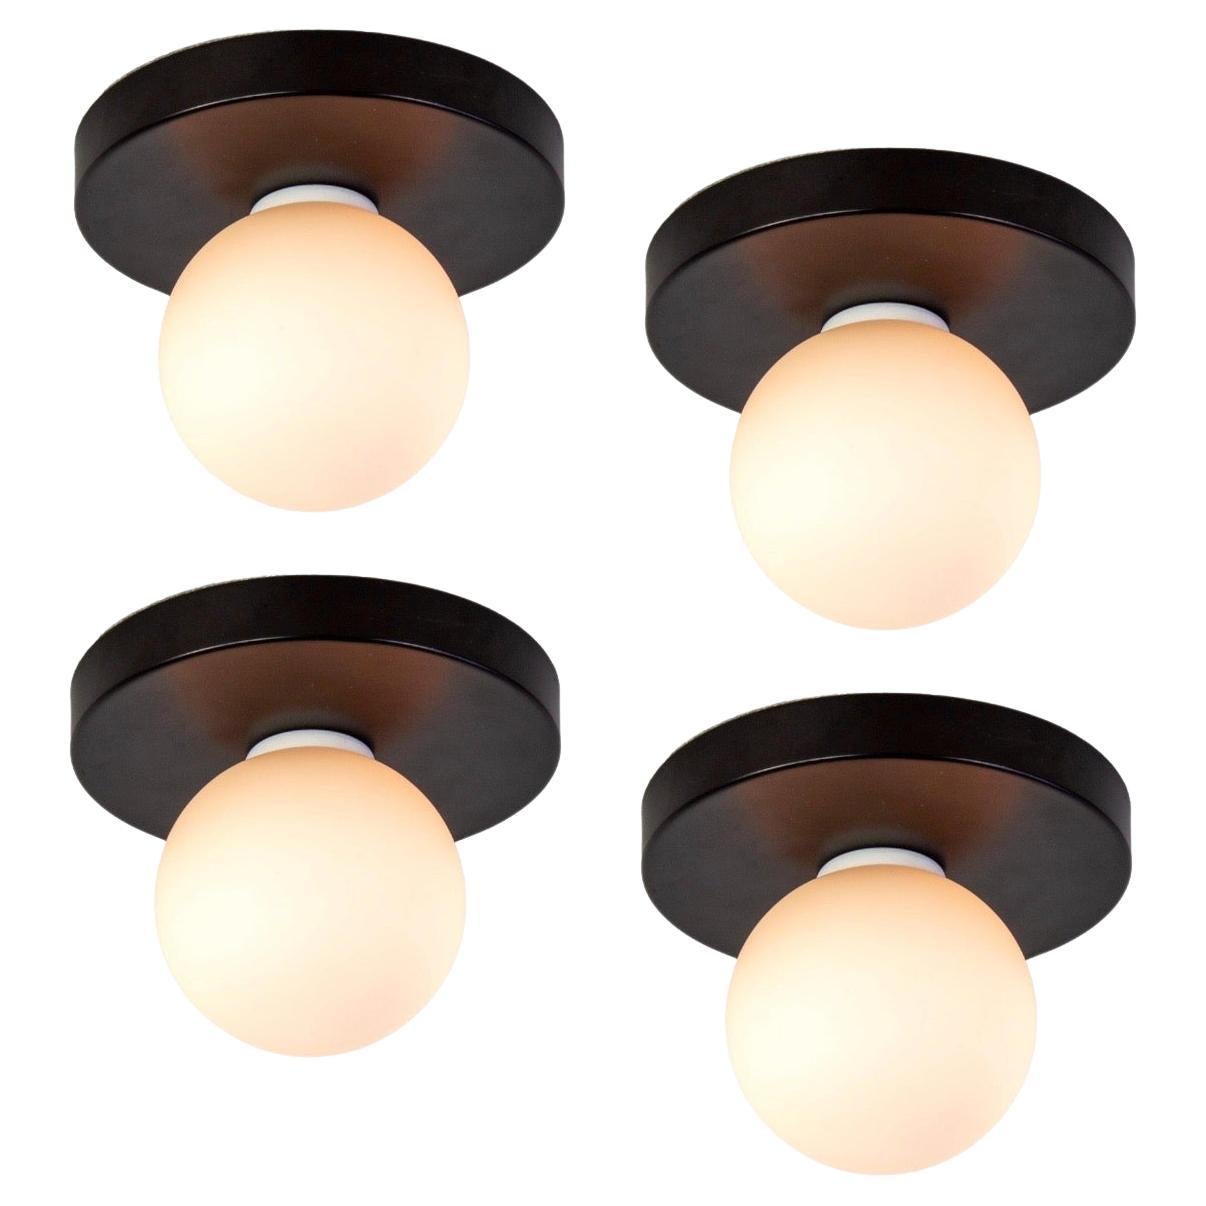 Set of 4 Globe Flush Mounts by Research.Lighting, Black Made to Order